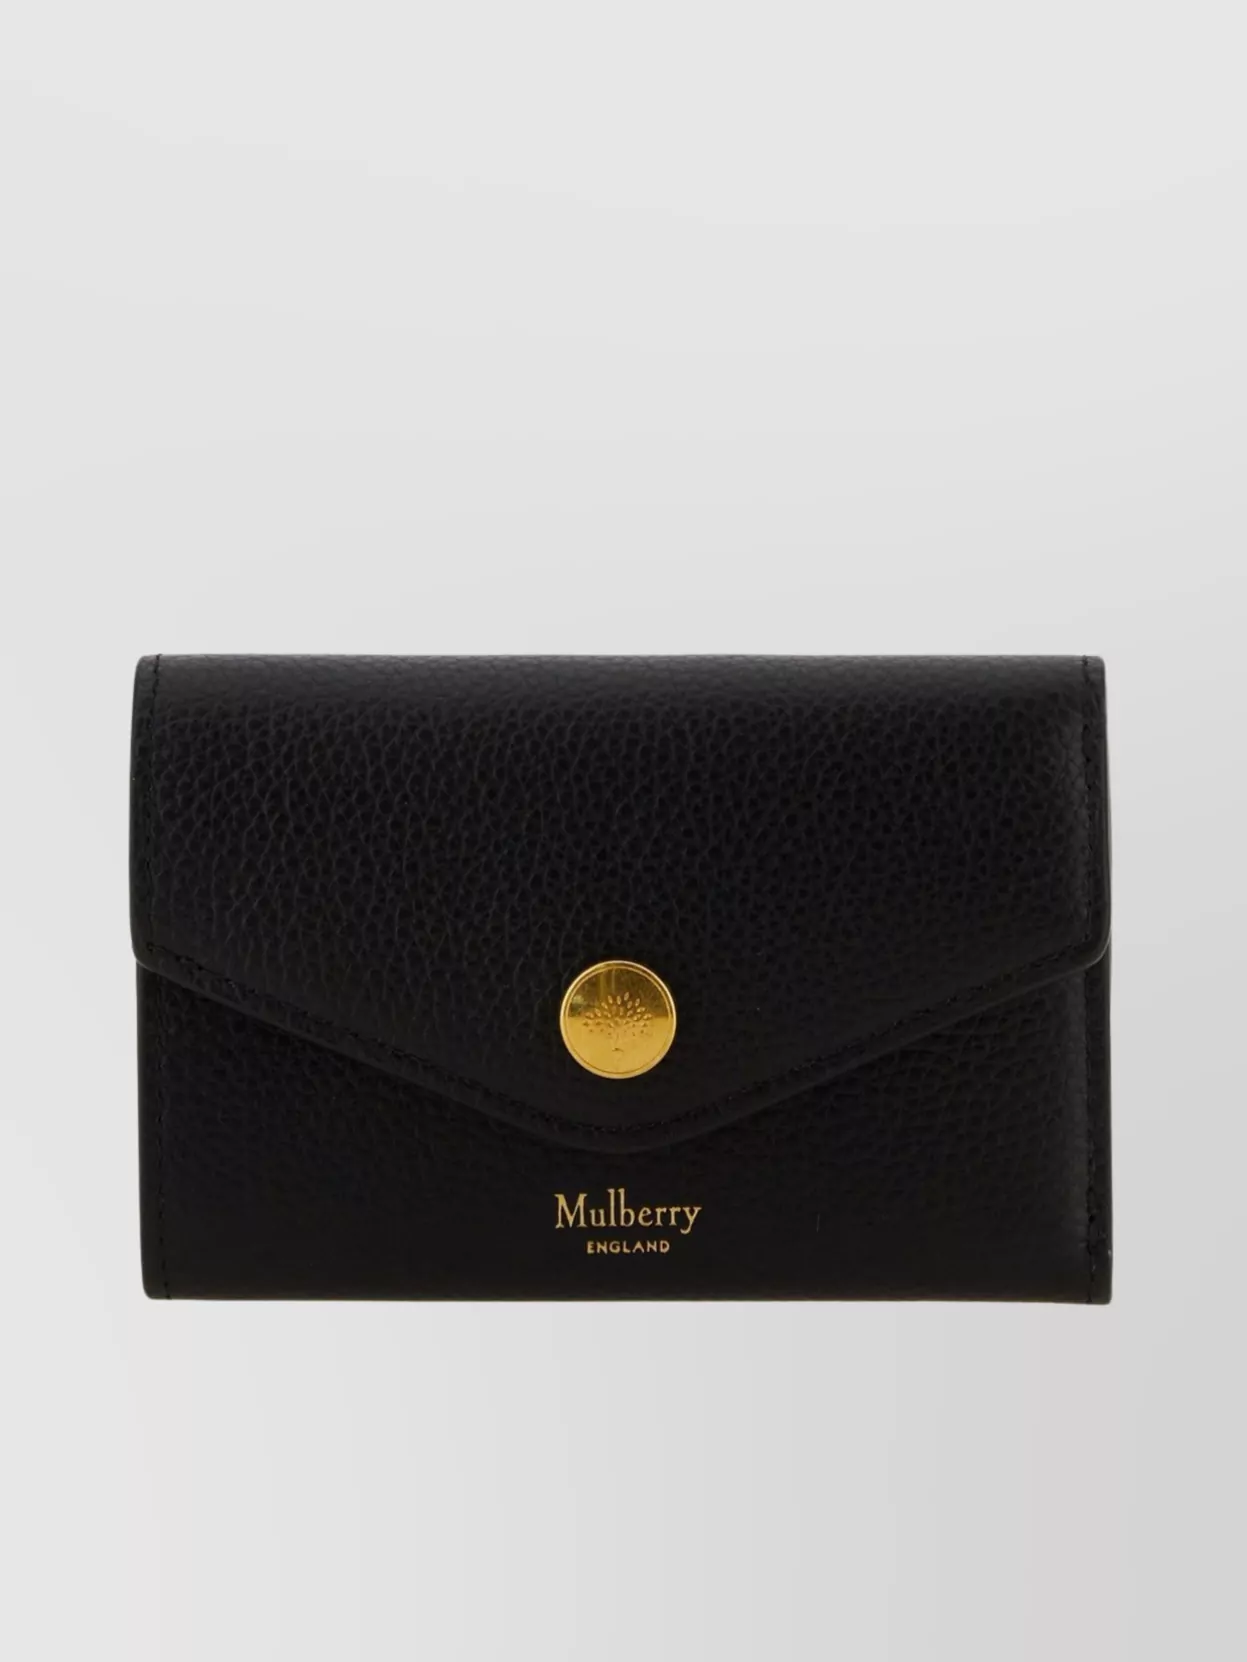 Mulberry Leather Foldover Top Purse